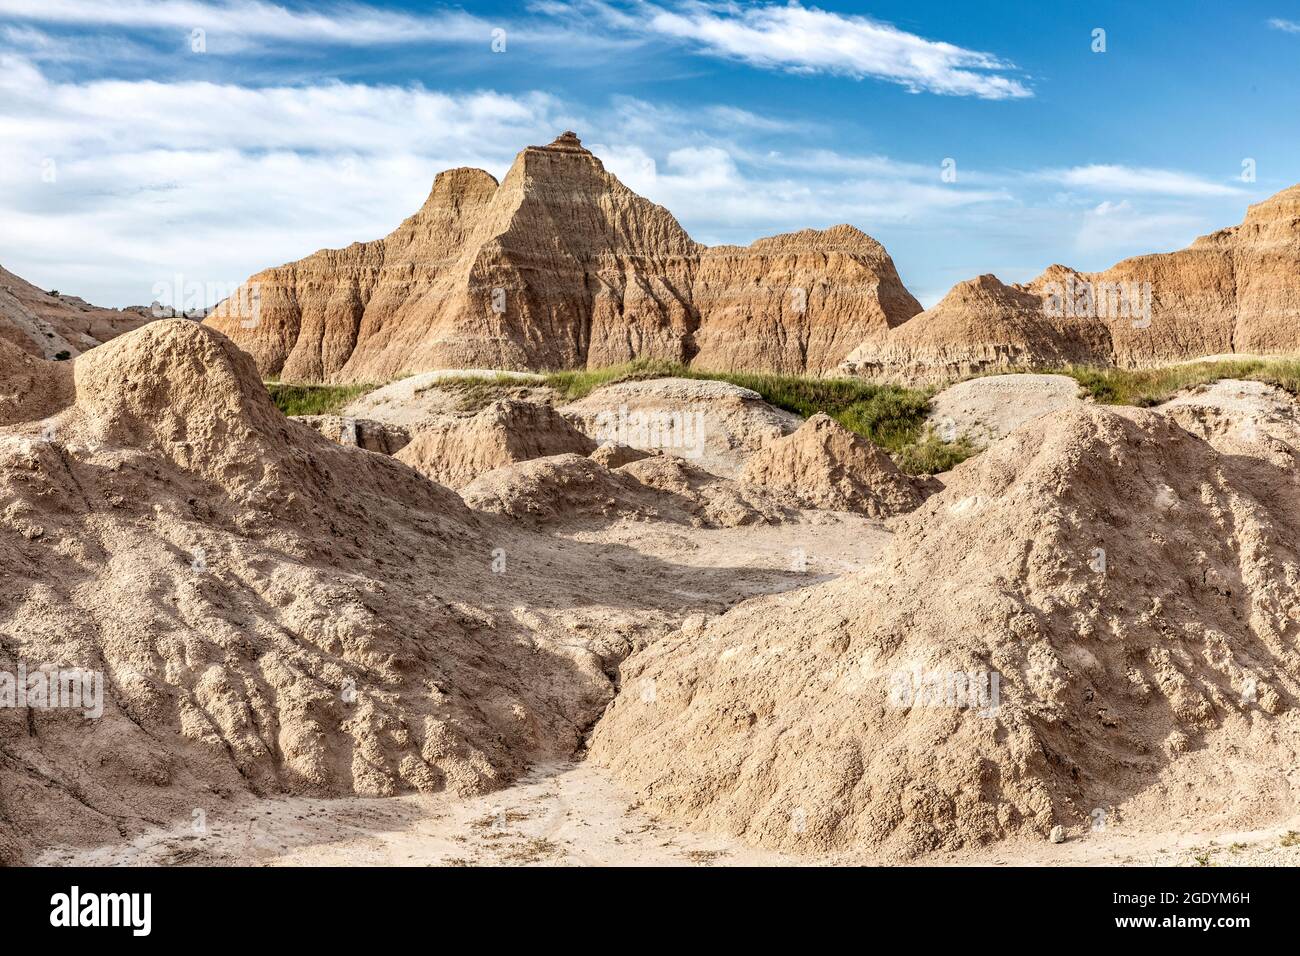 SD00471-00....SOUTH DAKOTA - Buttes near Fossil Exhibit Trail in Badlands National Park. Stock Photo